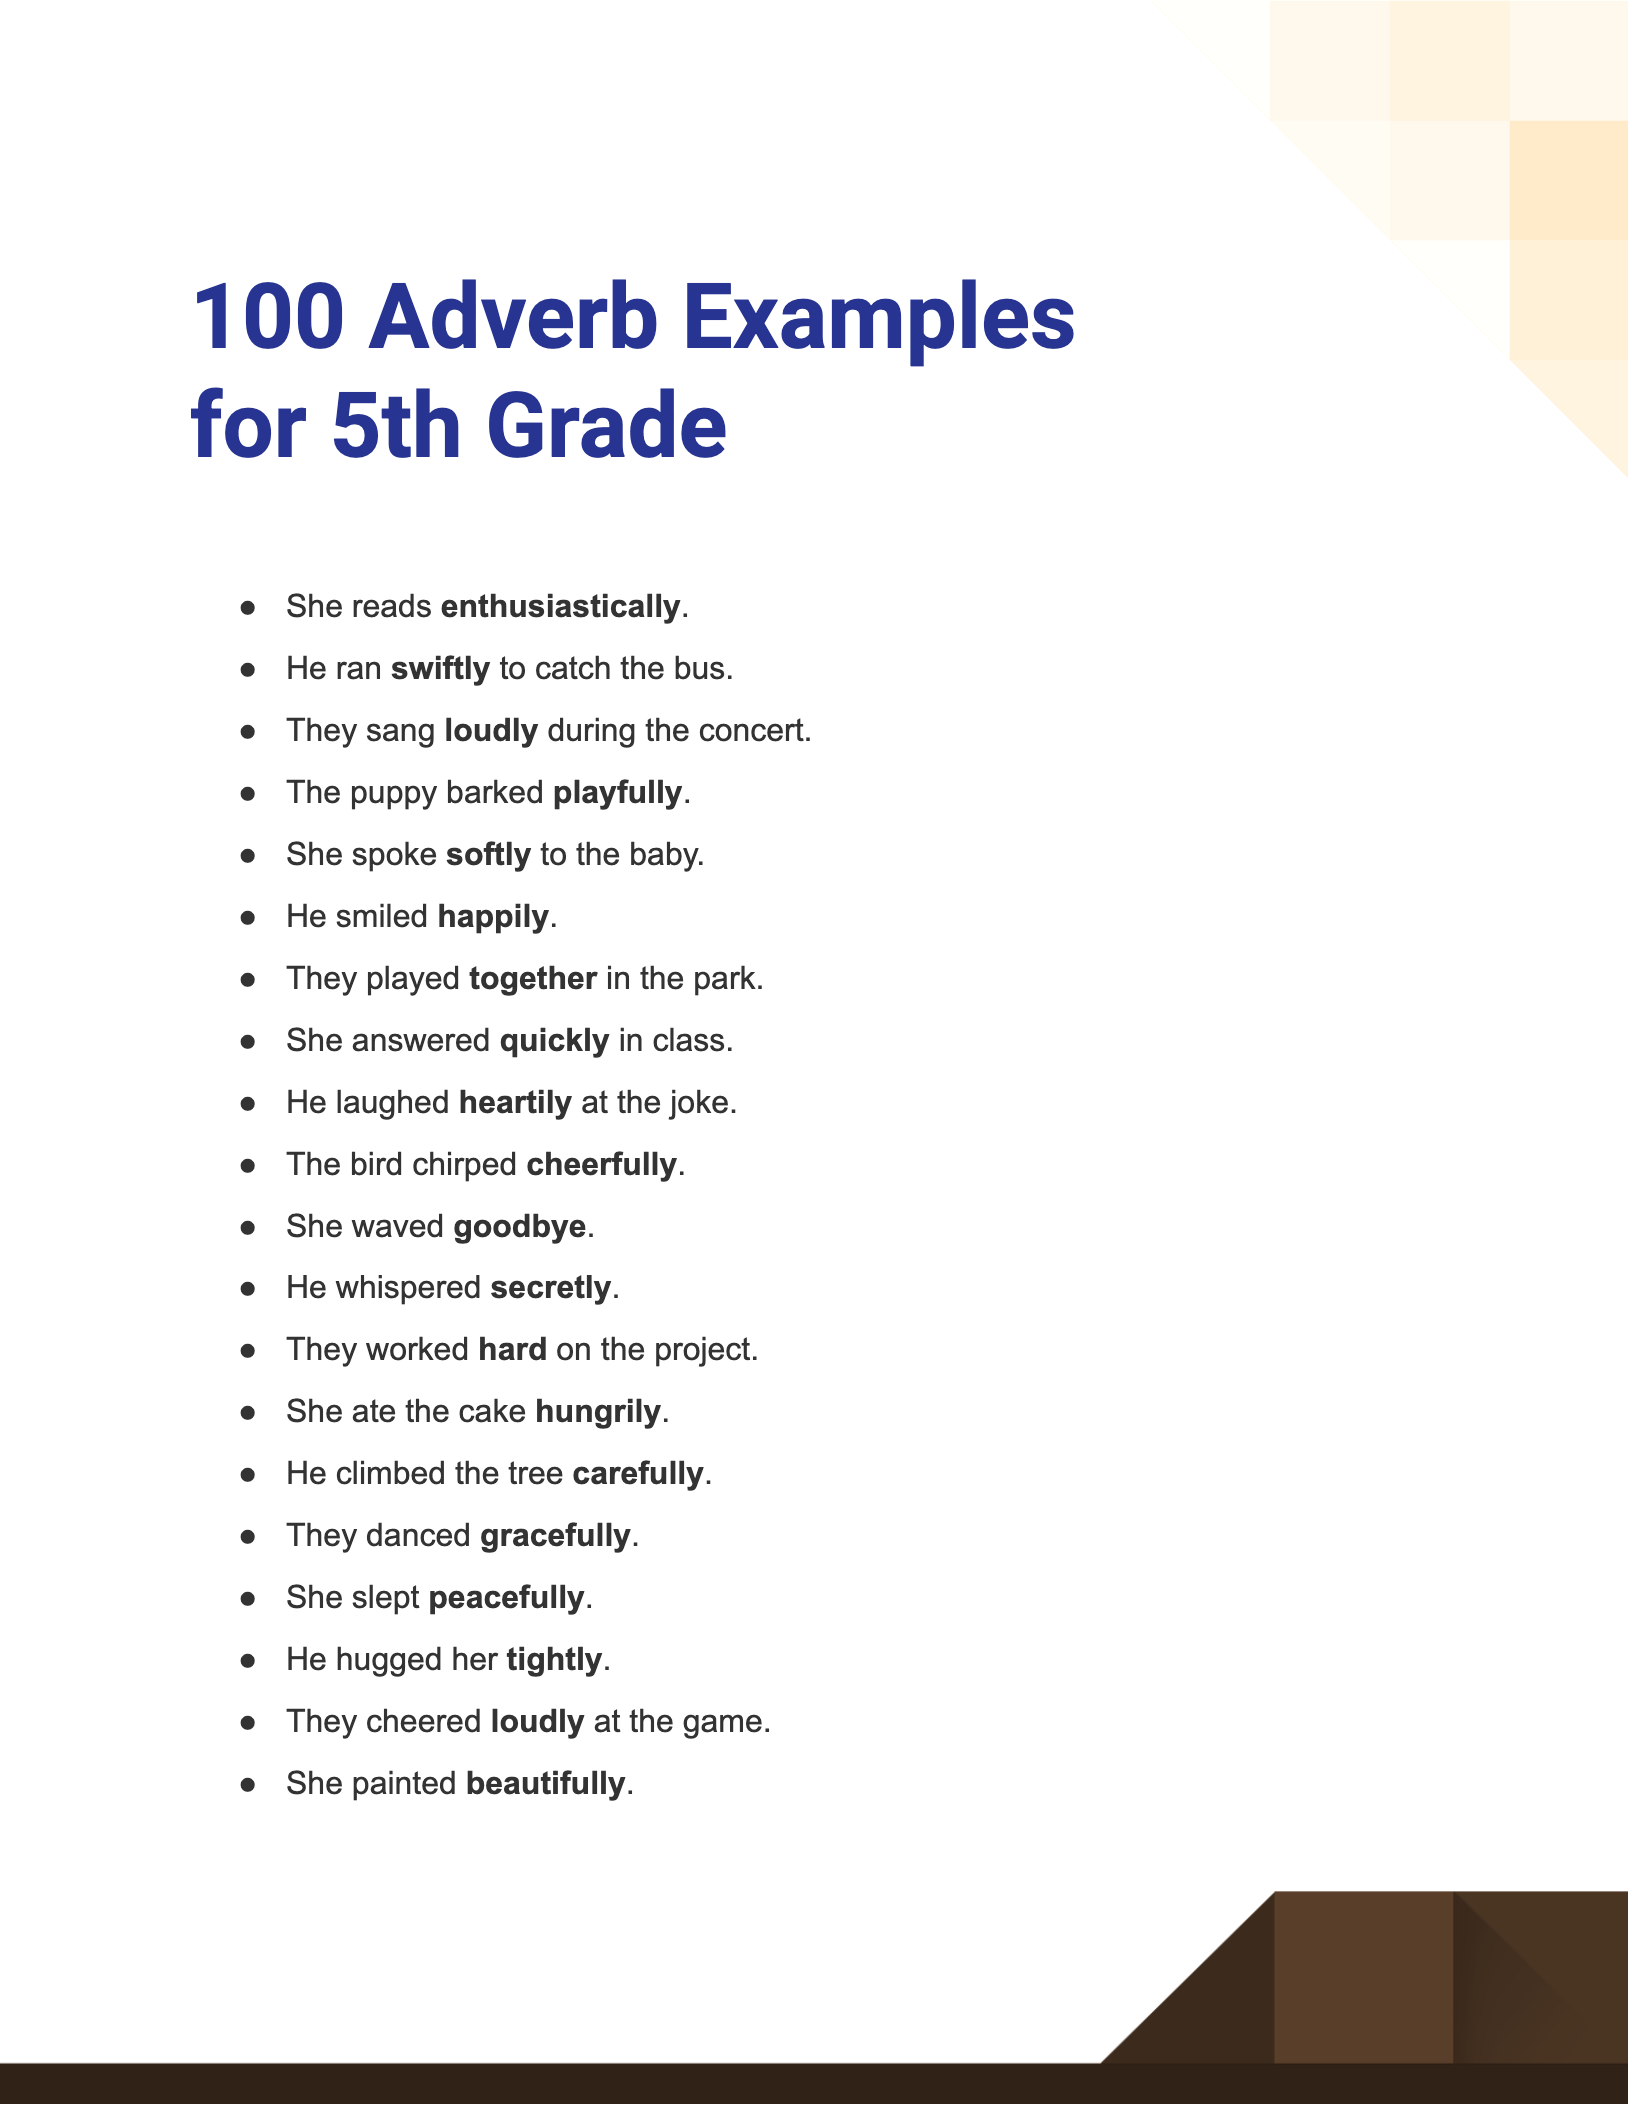 100-adverb-examples-for-5th-grade-how-to-use-tips-examples